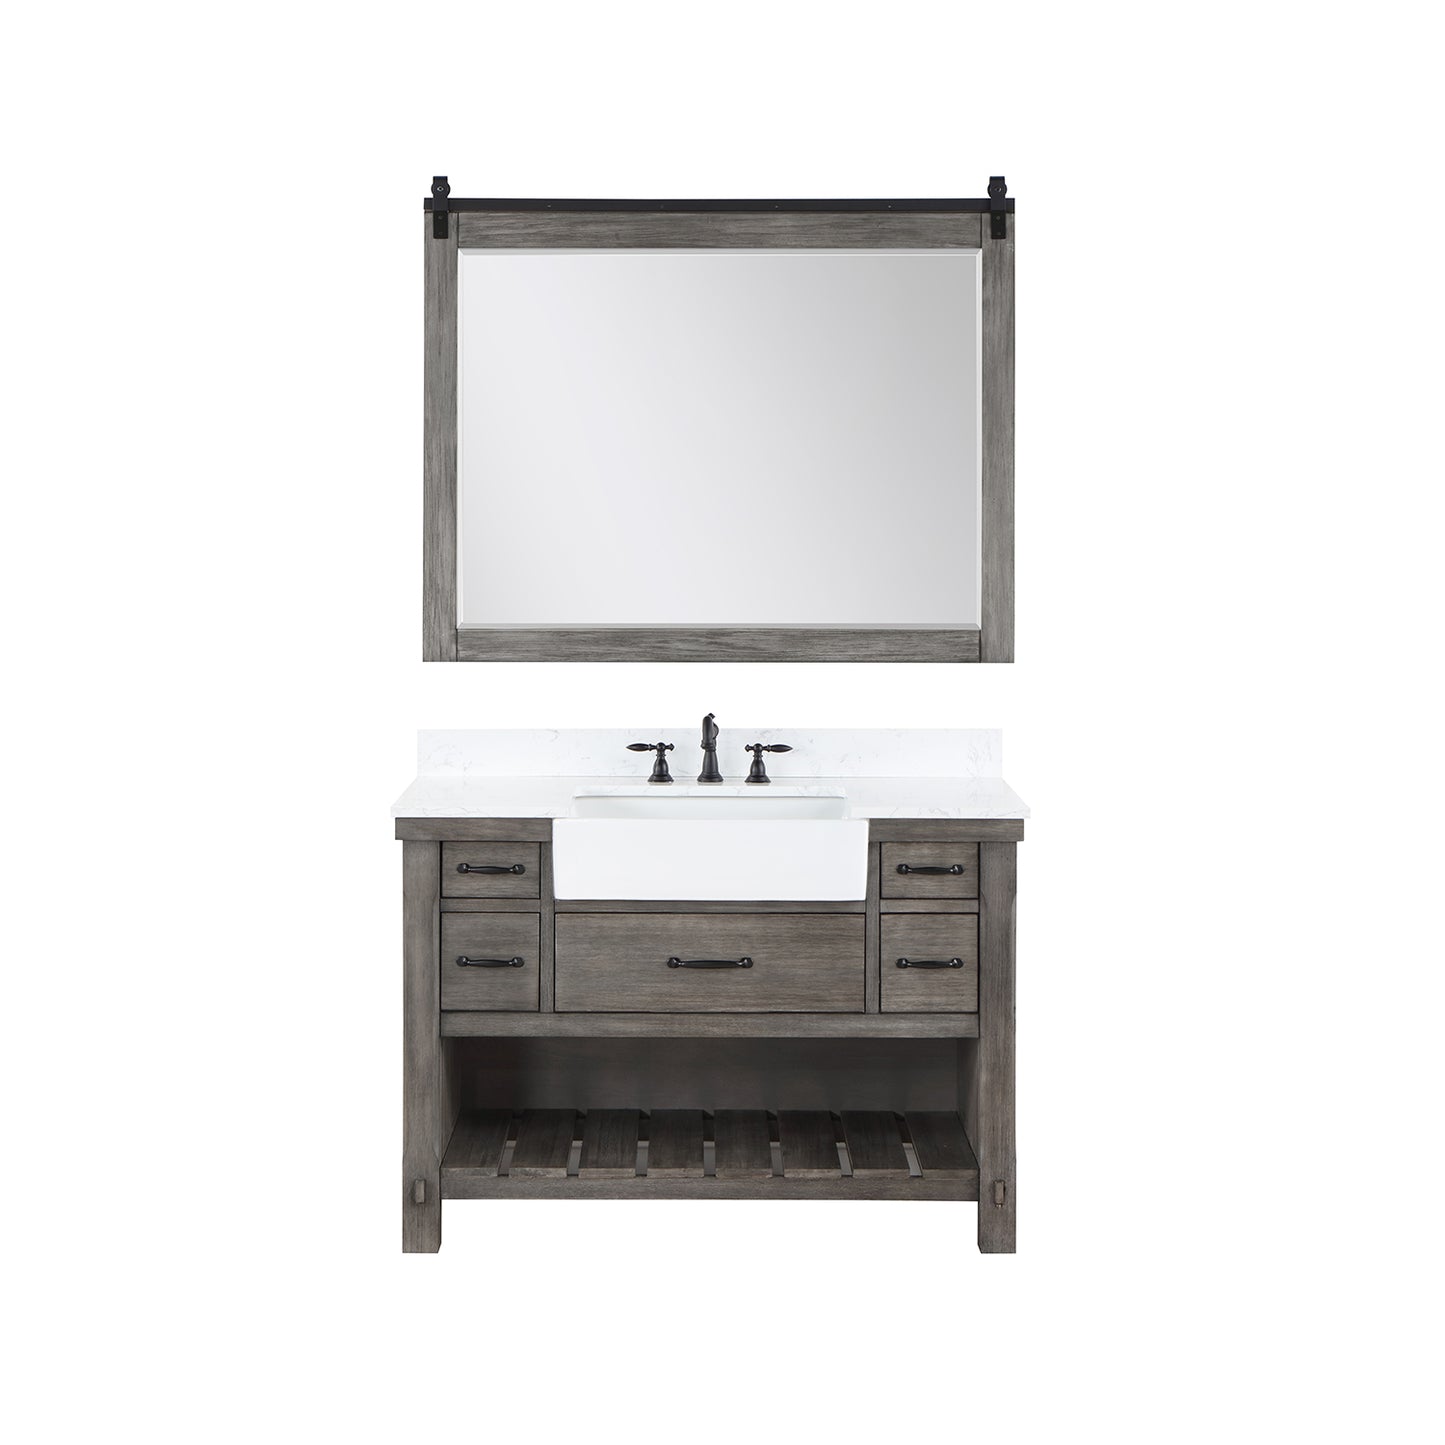 Villareal 48" Single Bath Vanity in Classical Grey with Composite Stone Top in White, White Farmhouse Basin and Mirror